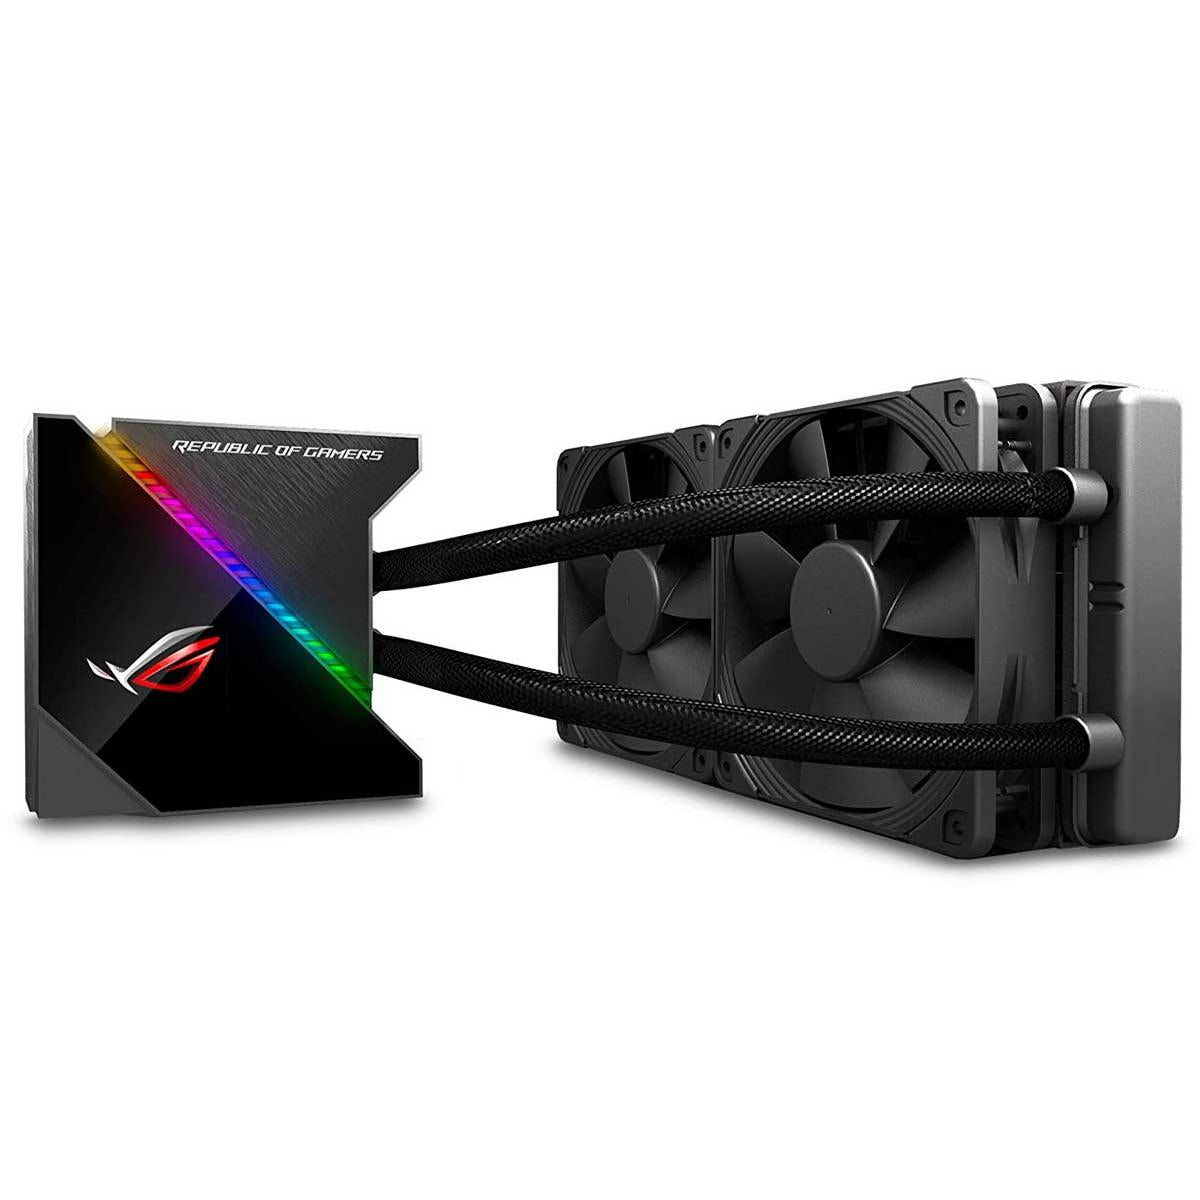 Asus ROG Ryujin 240 all-in-one liquid CPU cooler with LiveDash color OLED, LGA1700 Support